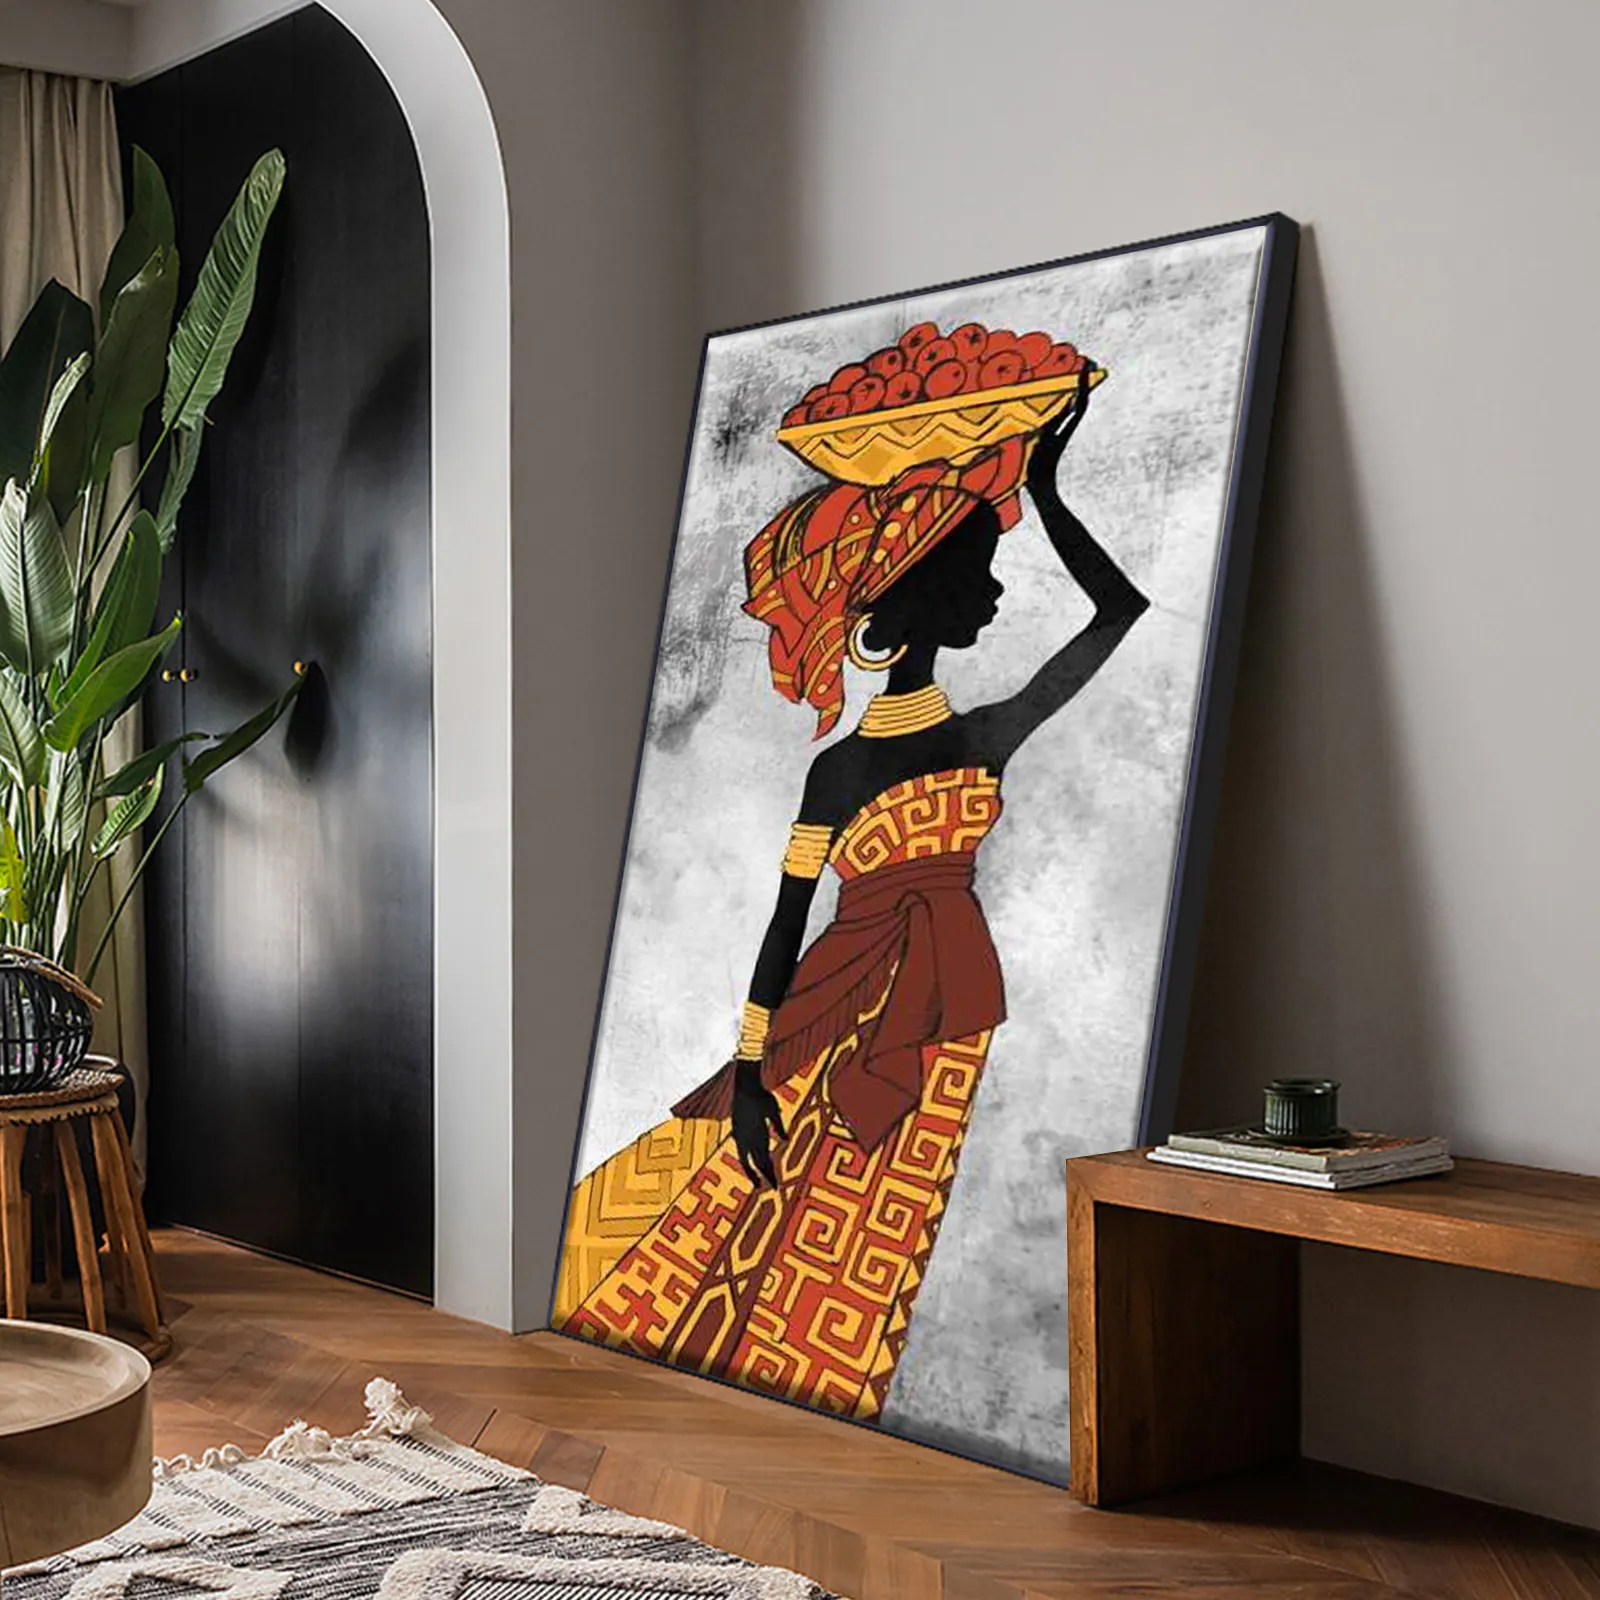 Modern African Tribal Art Canvas Painting Black Woman Dancing Poster and Print Abstract Wall Art Pictures For Living Room Decor